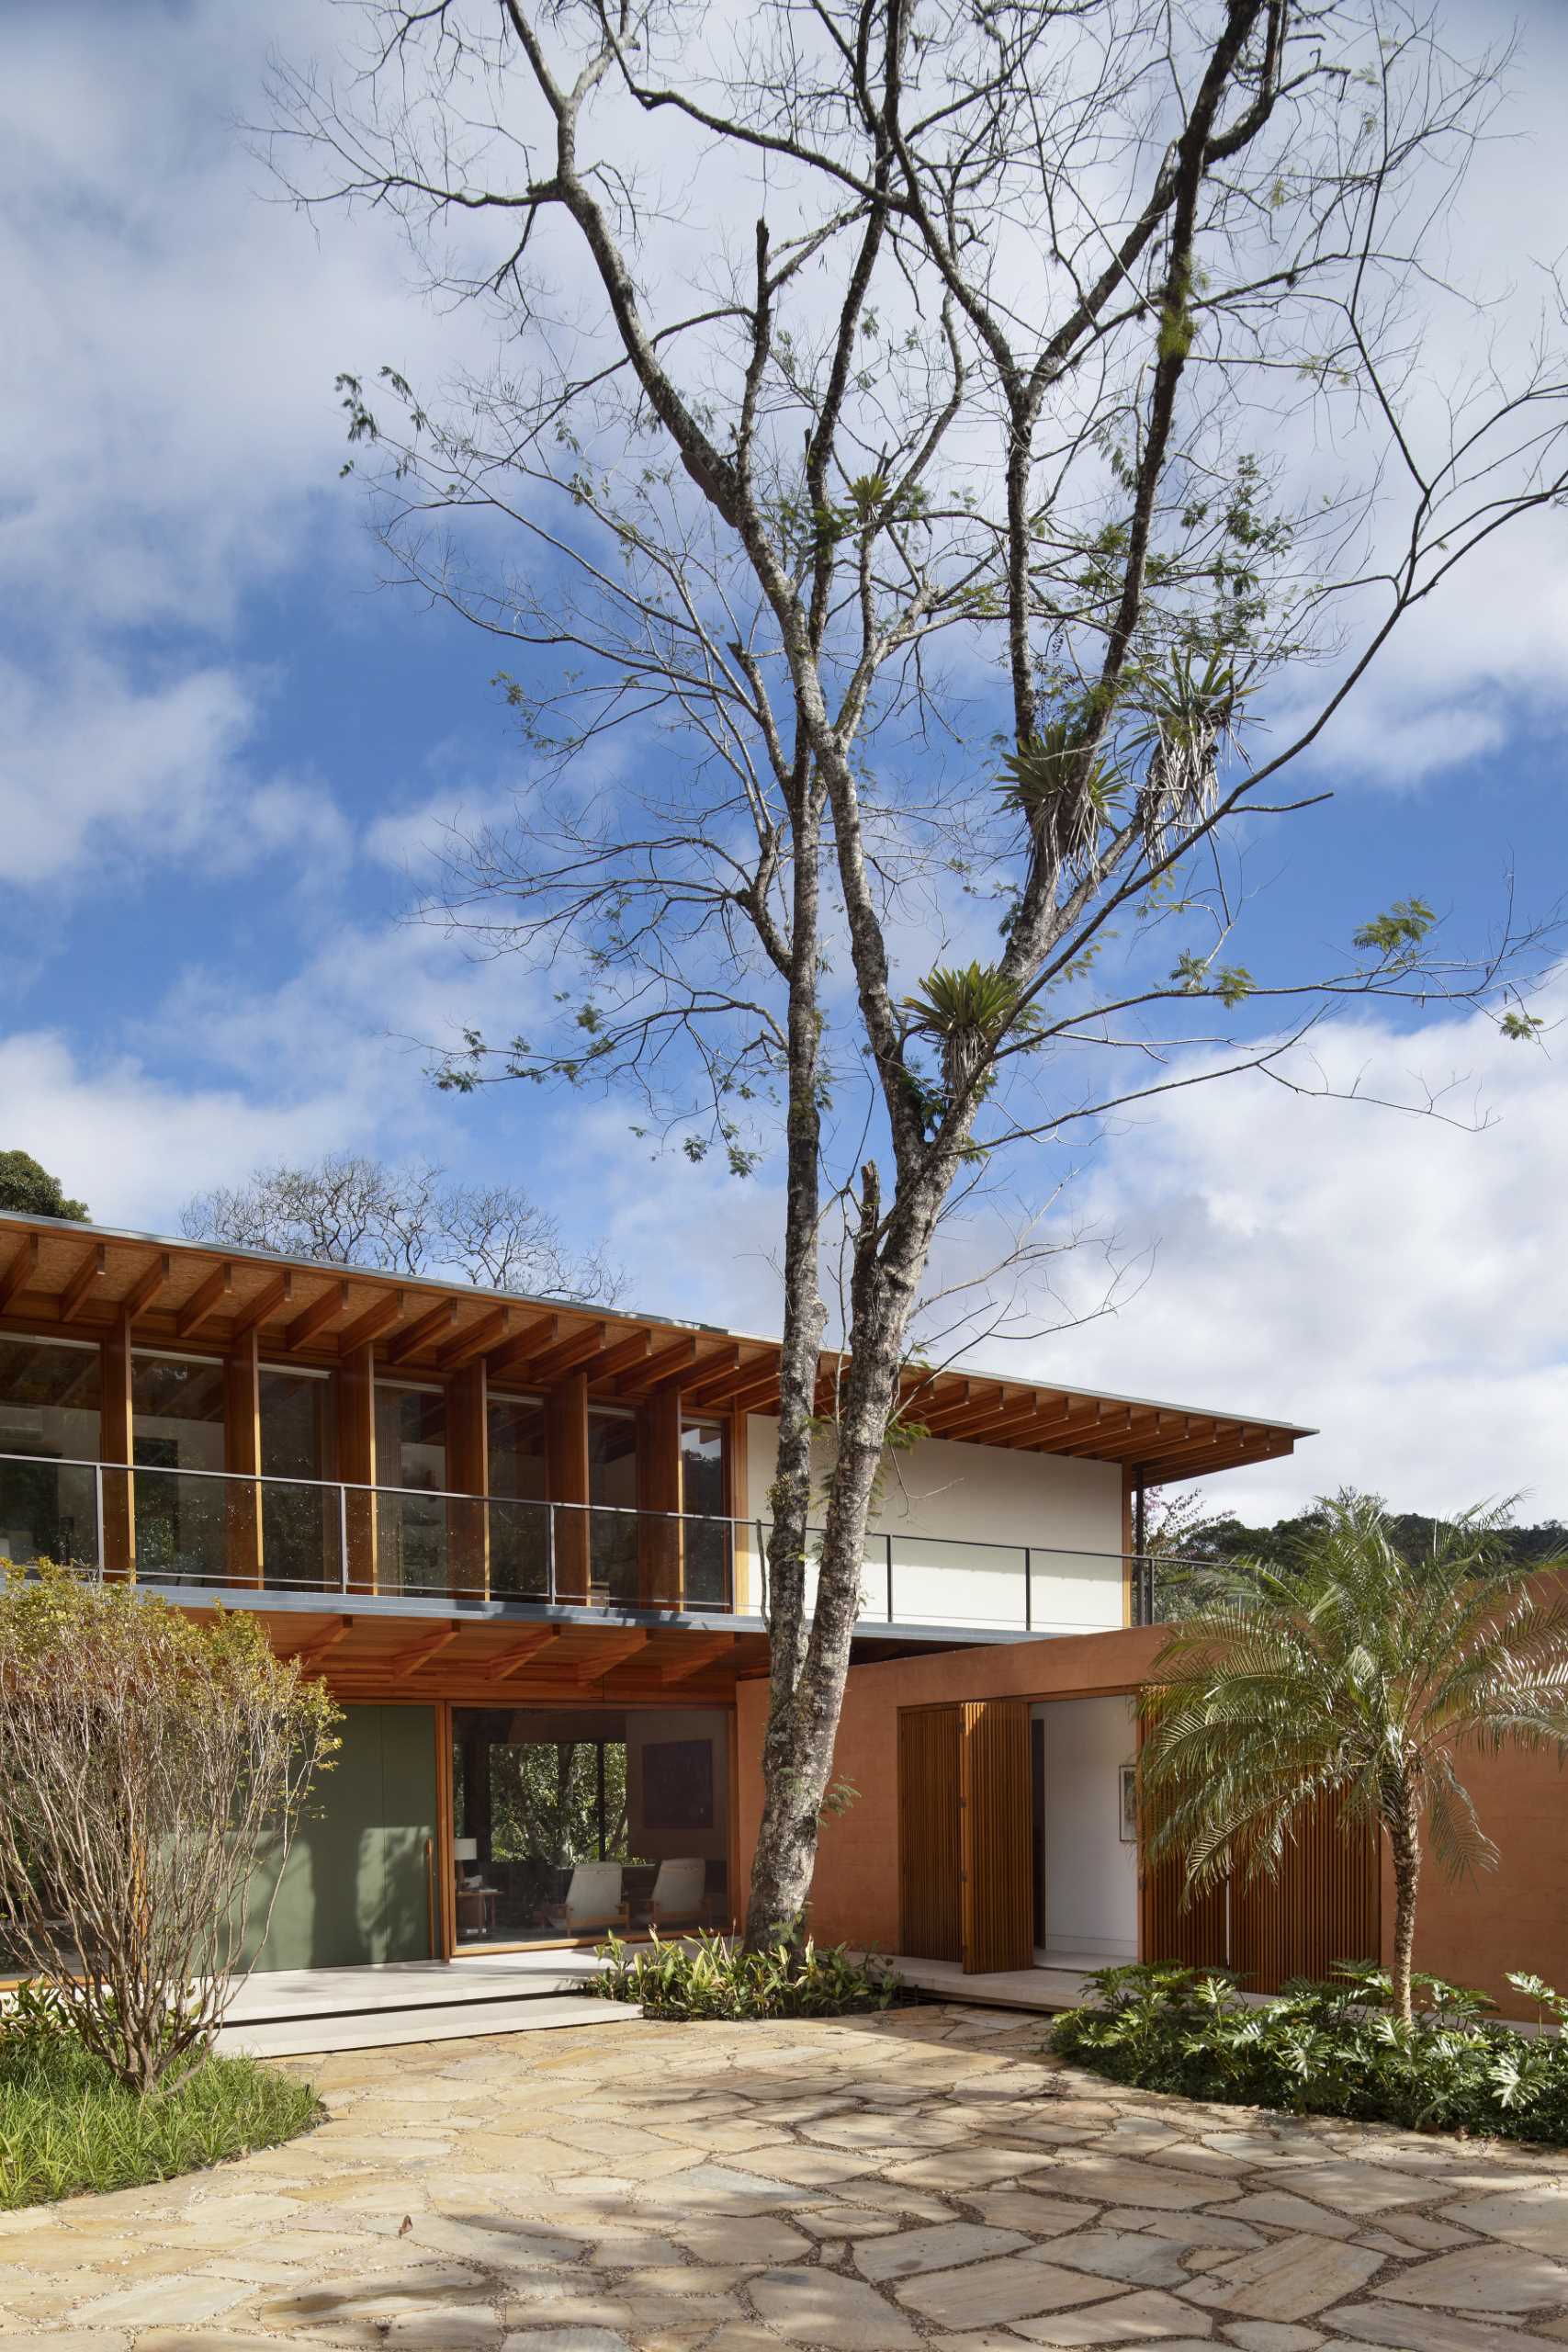 A modern house in Brazil has its post and beam structure on display throughout the interior and exterior.